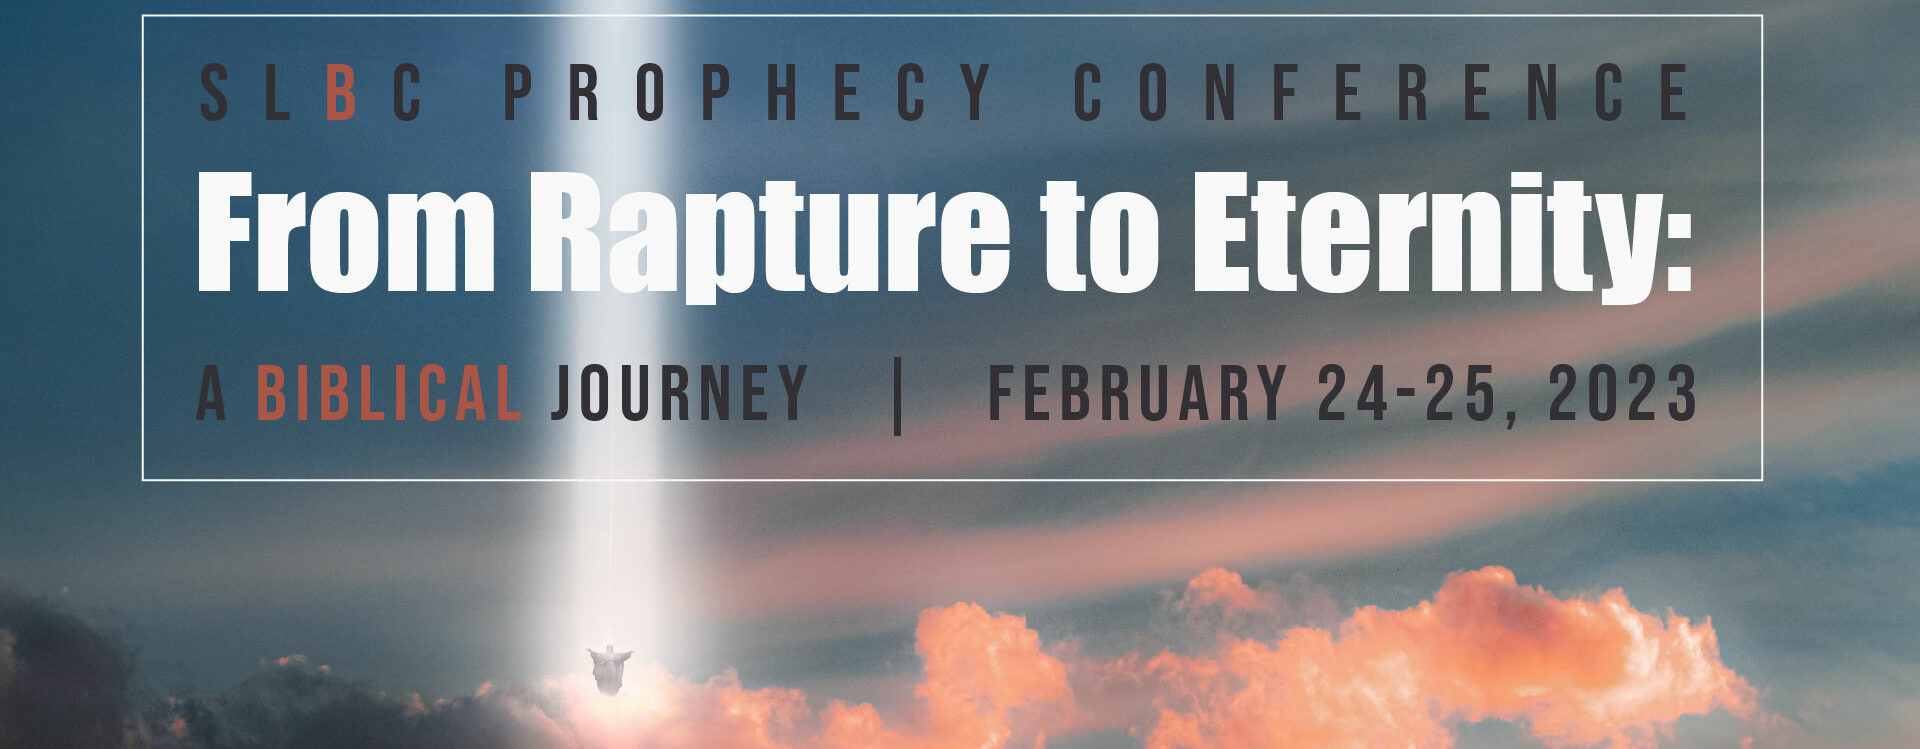 Featured image for 2023 Prophecy Conference